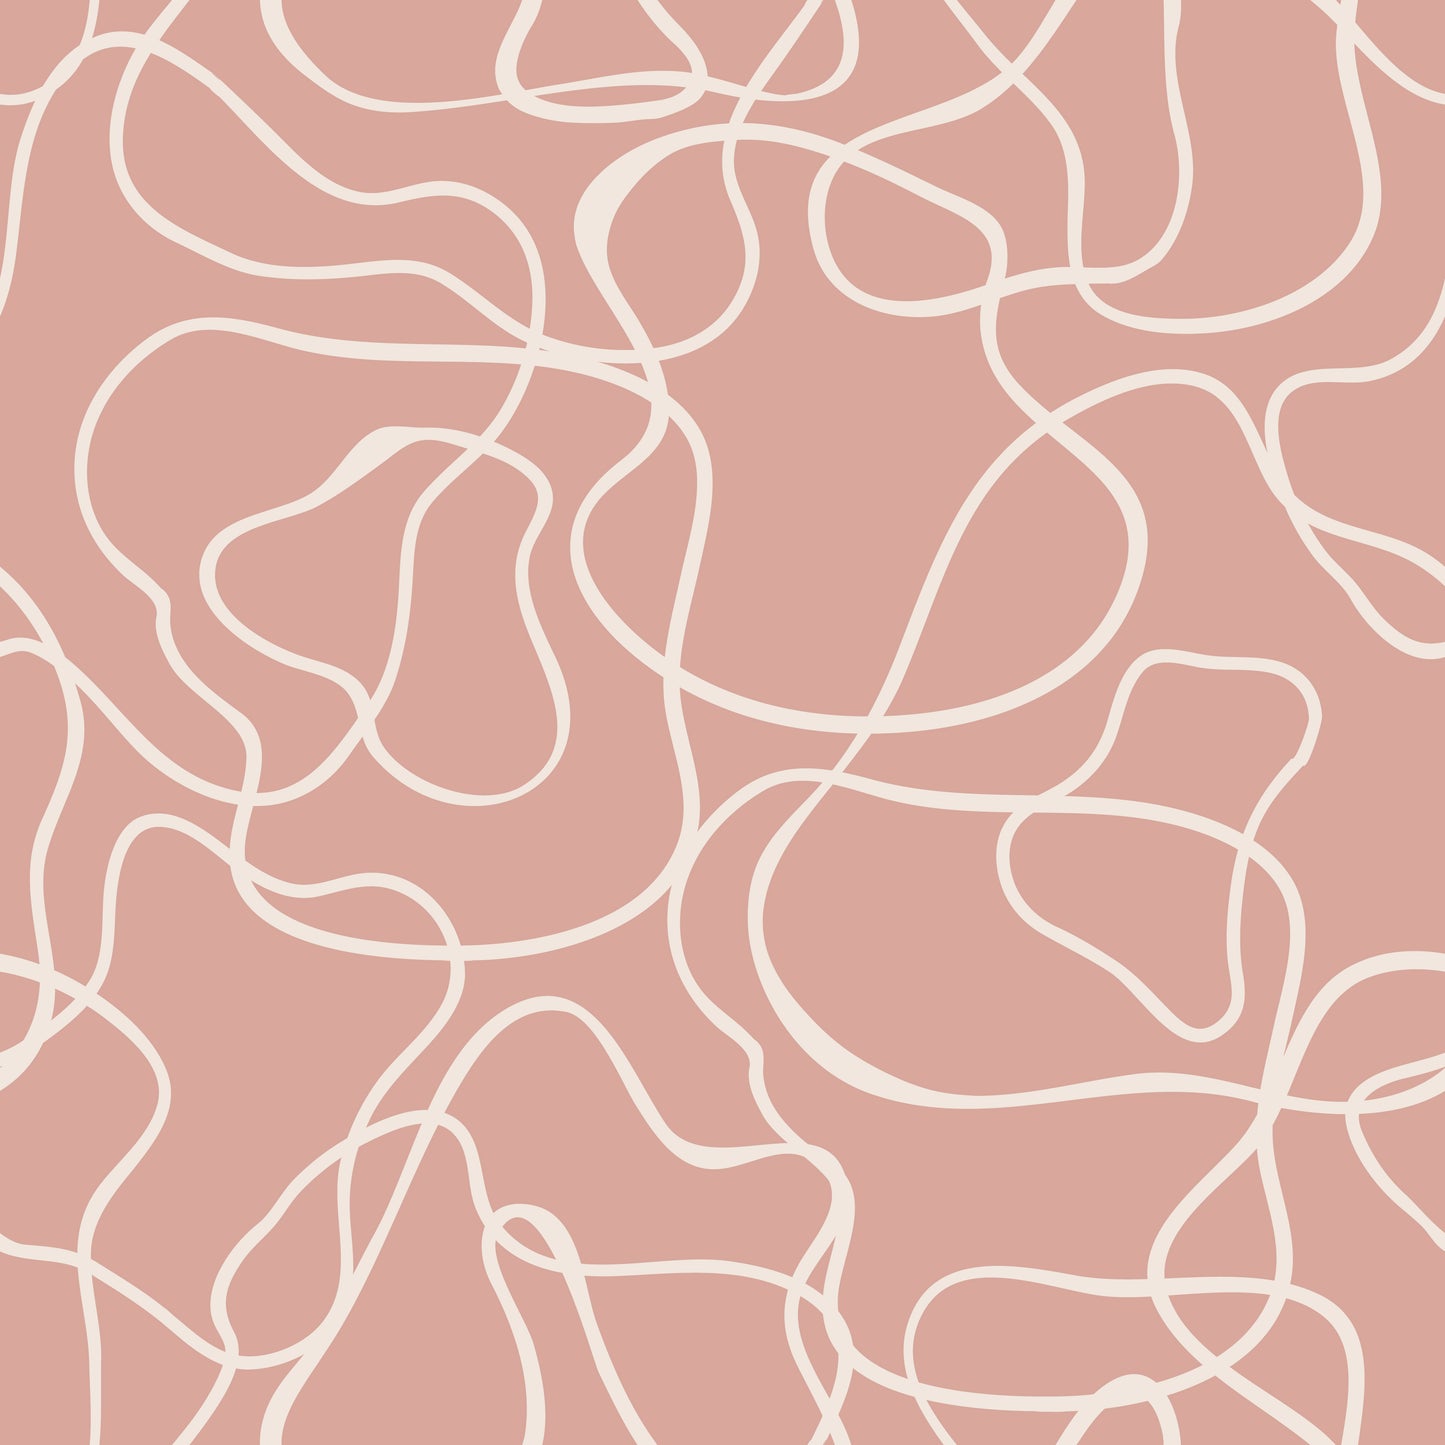 pink and white abstract design